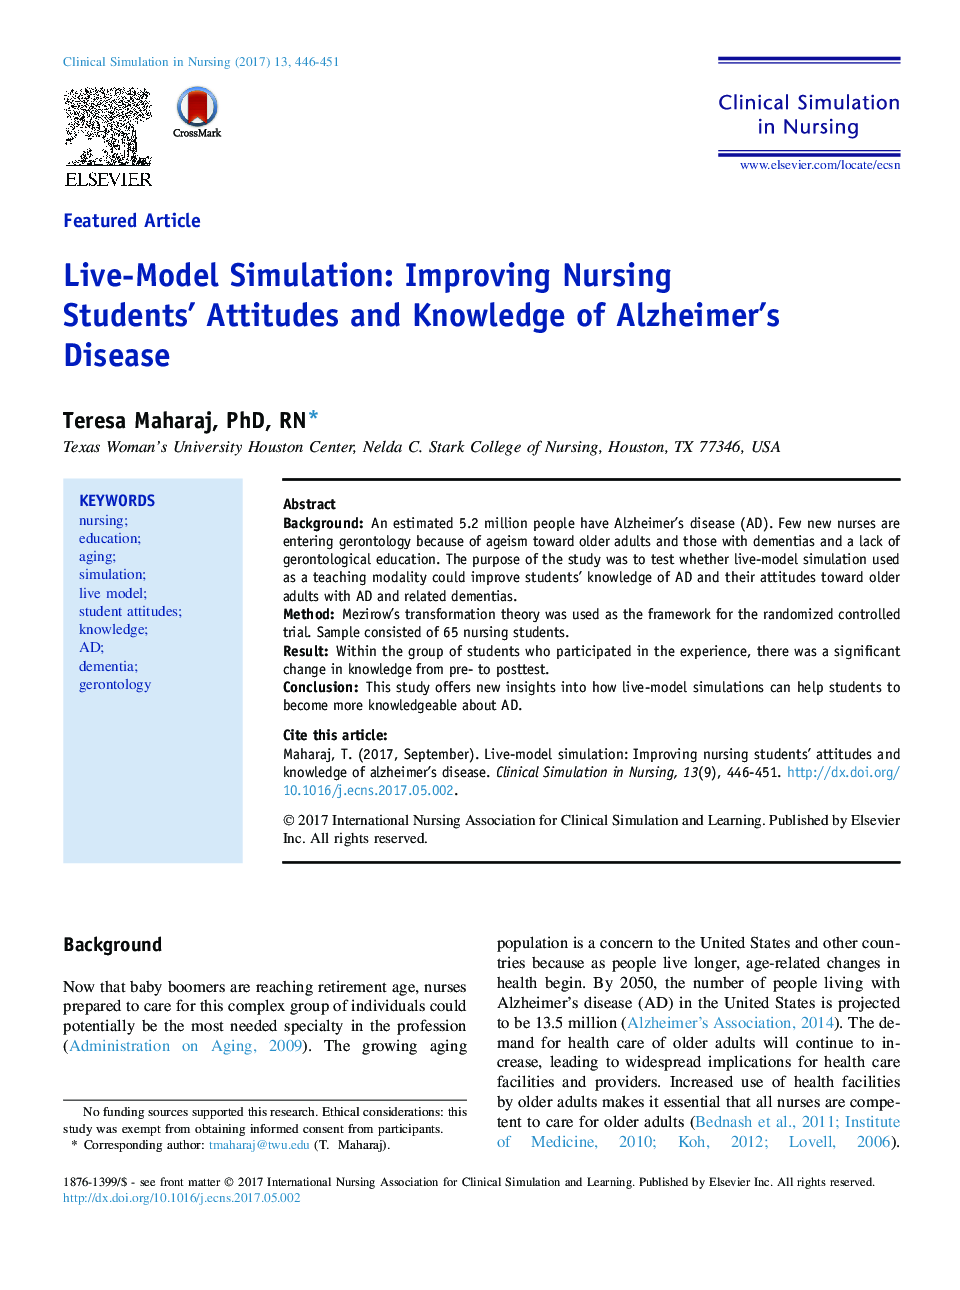 Live-Model Simulation: Improving Nursing Students' Attitudes and Knowledge of Alzheimer's Disease